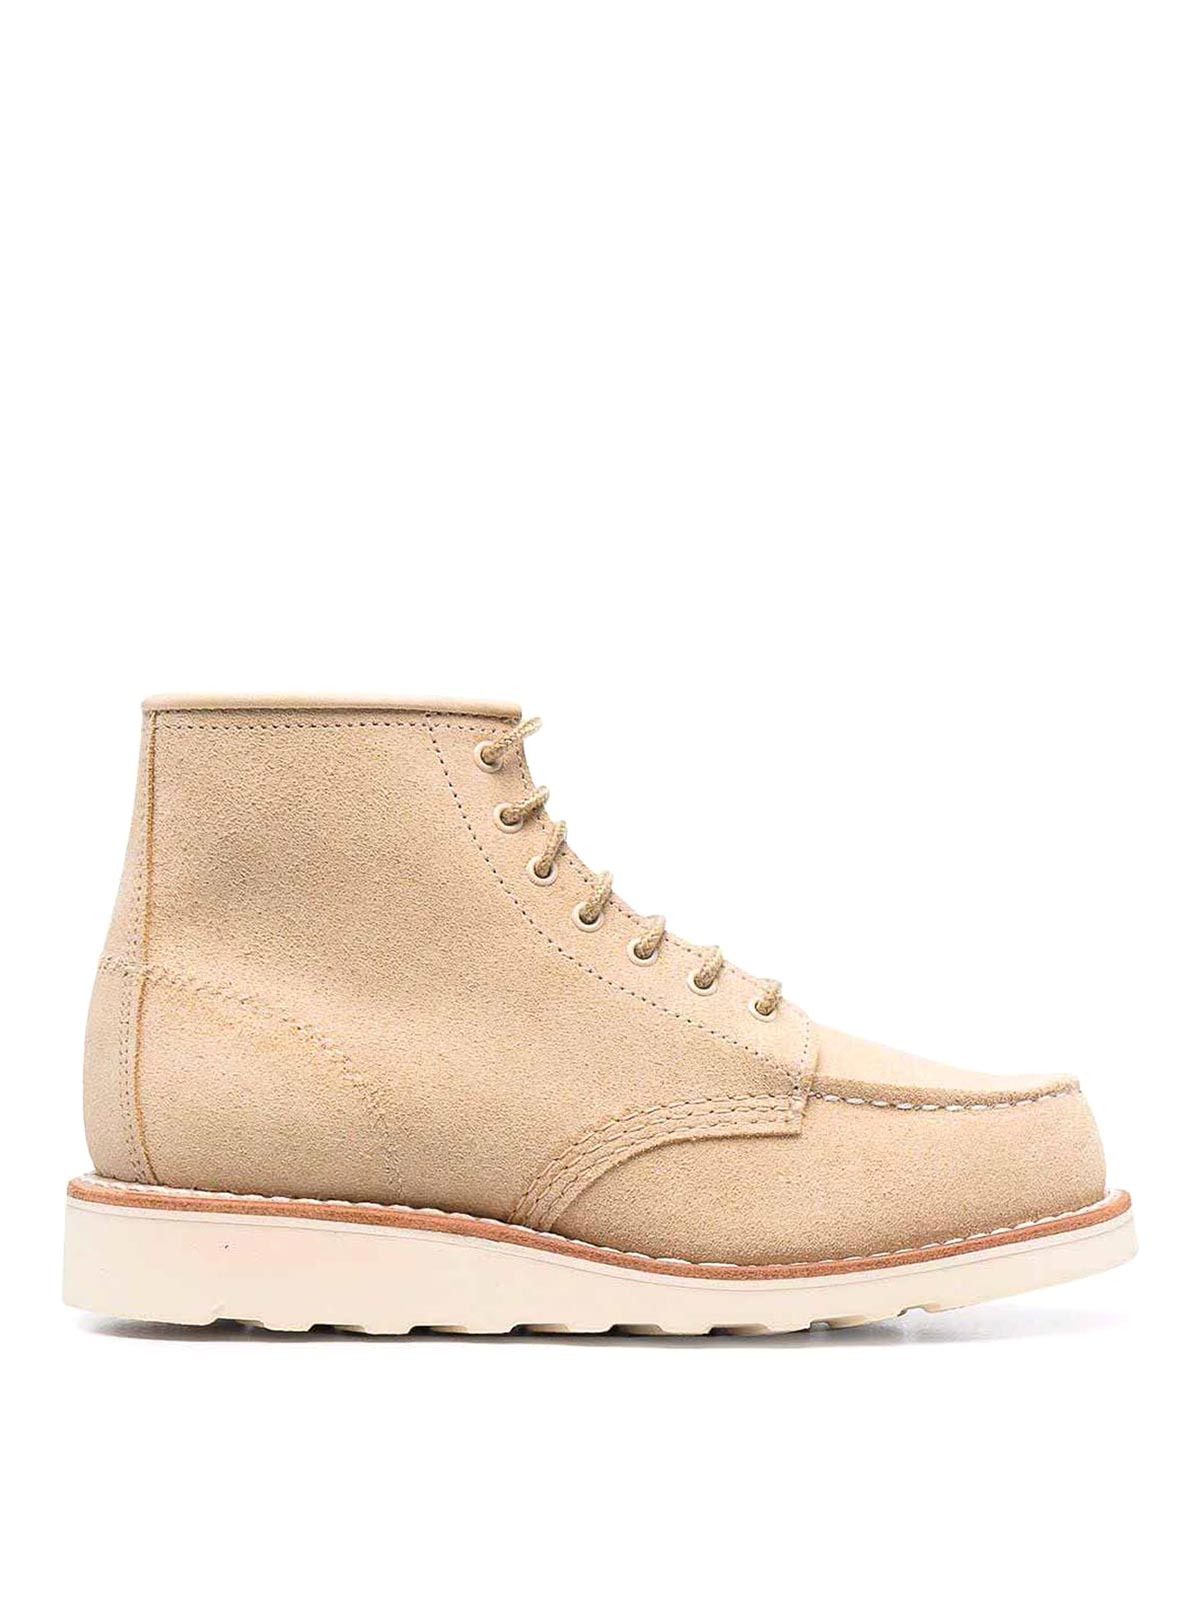 Red Wing Shoes Classic Moc Leather Ankle Boots In Beige